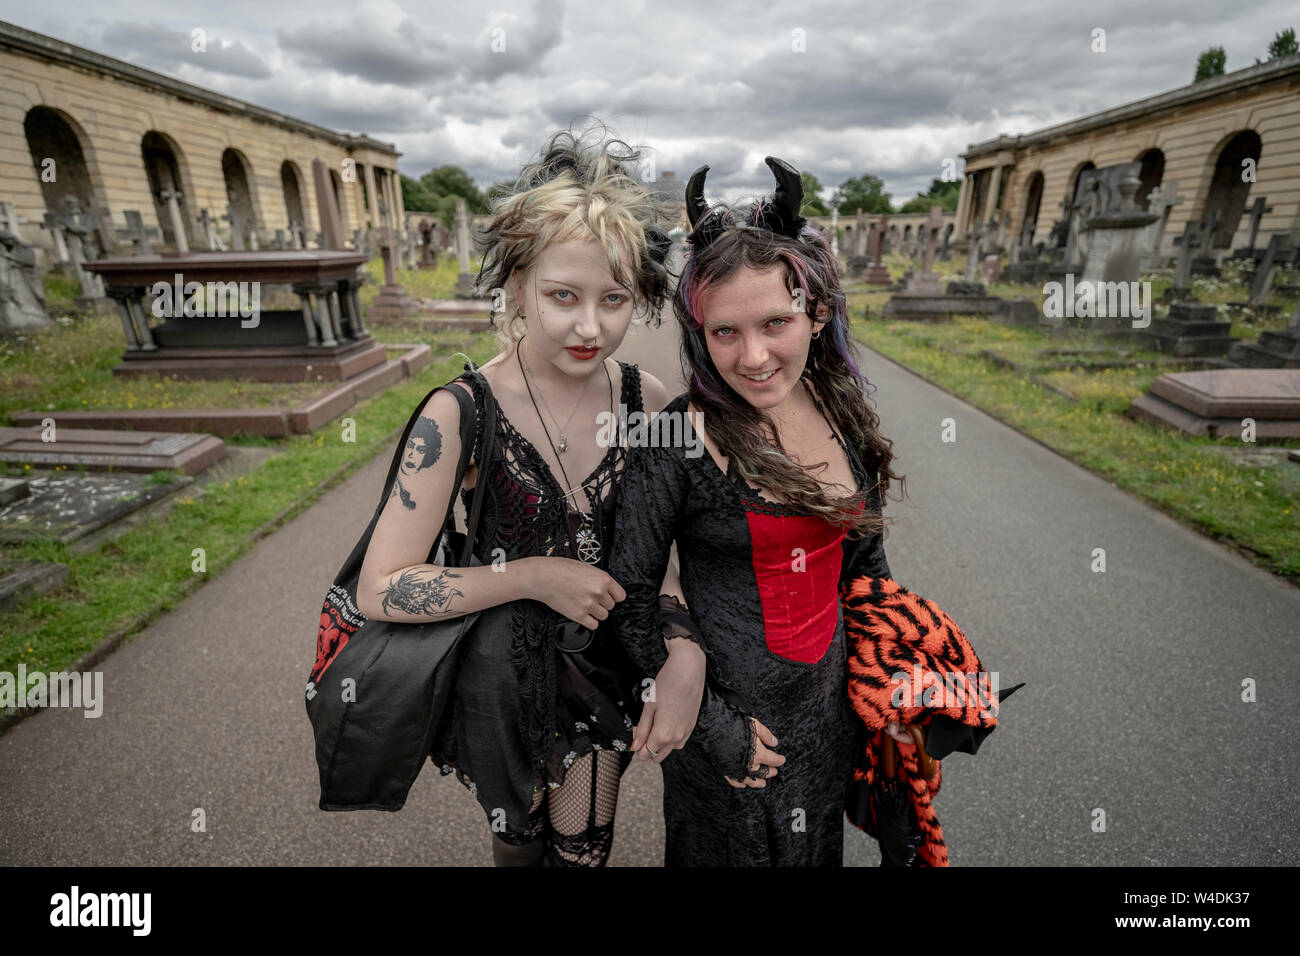 London, UK. 21st July 2019. Members of London Vampire Society and other goths attend the annual Brompton Cemetery Open Day. Credit: Guy Corbishley/Alamy Live News Stock Photo